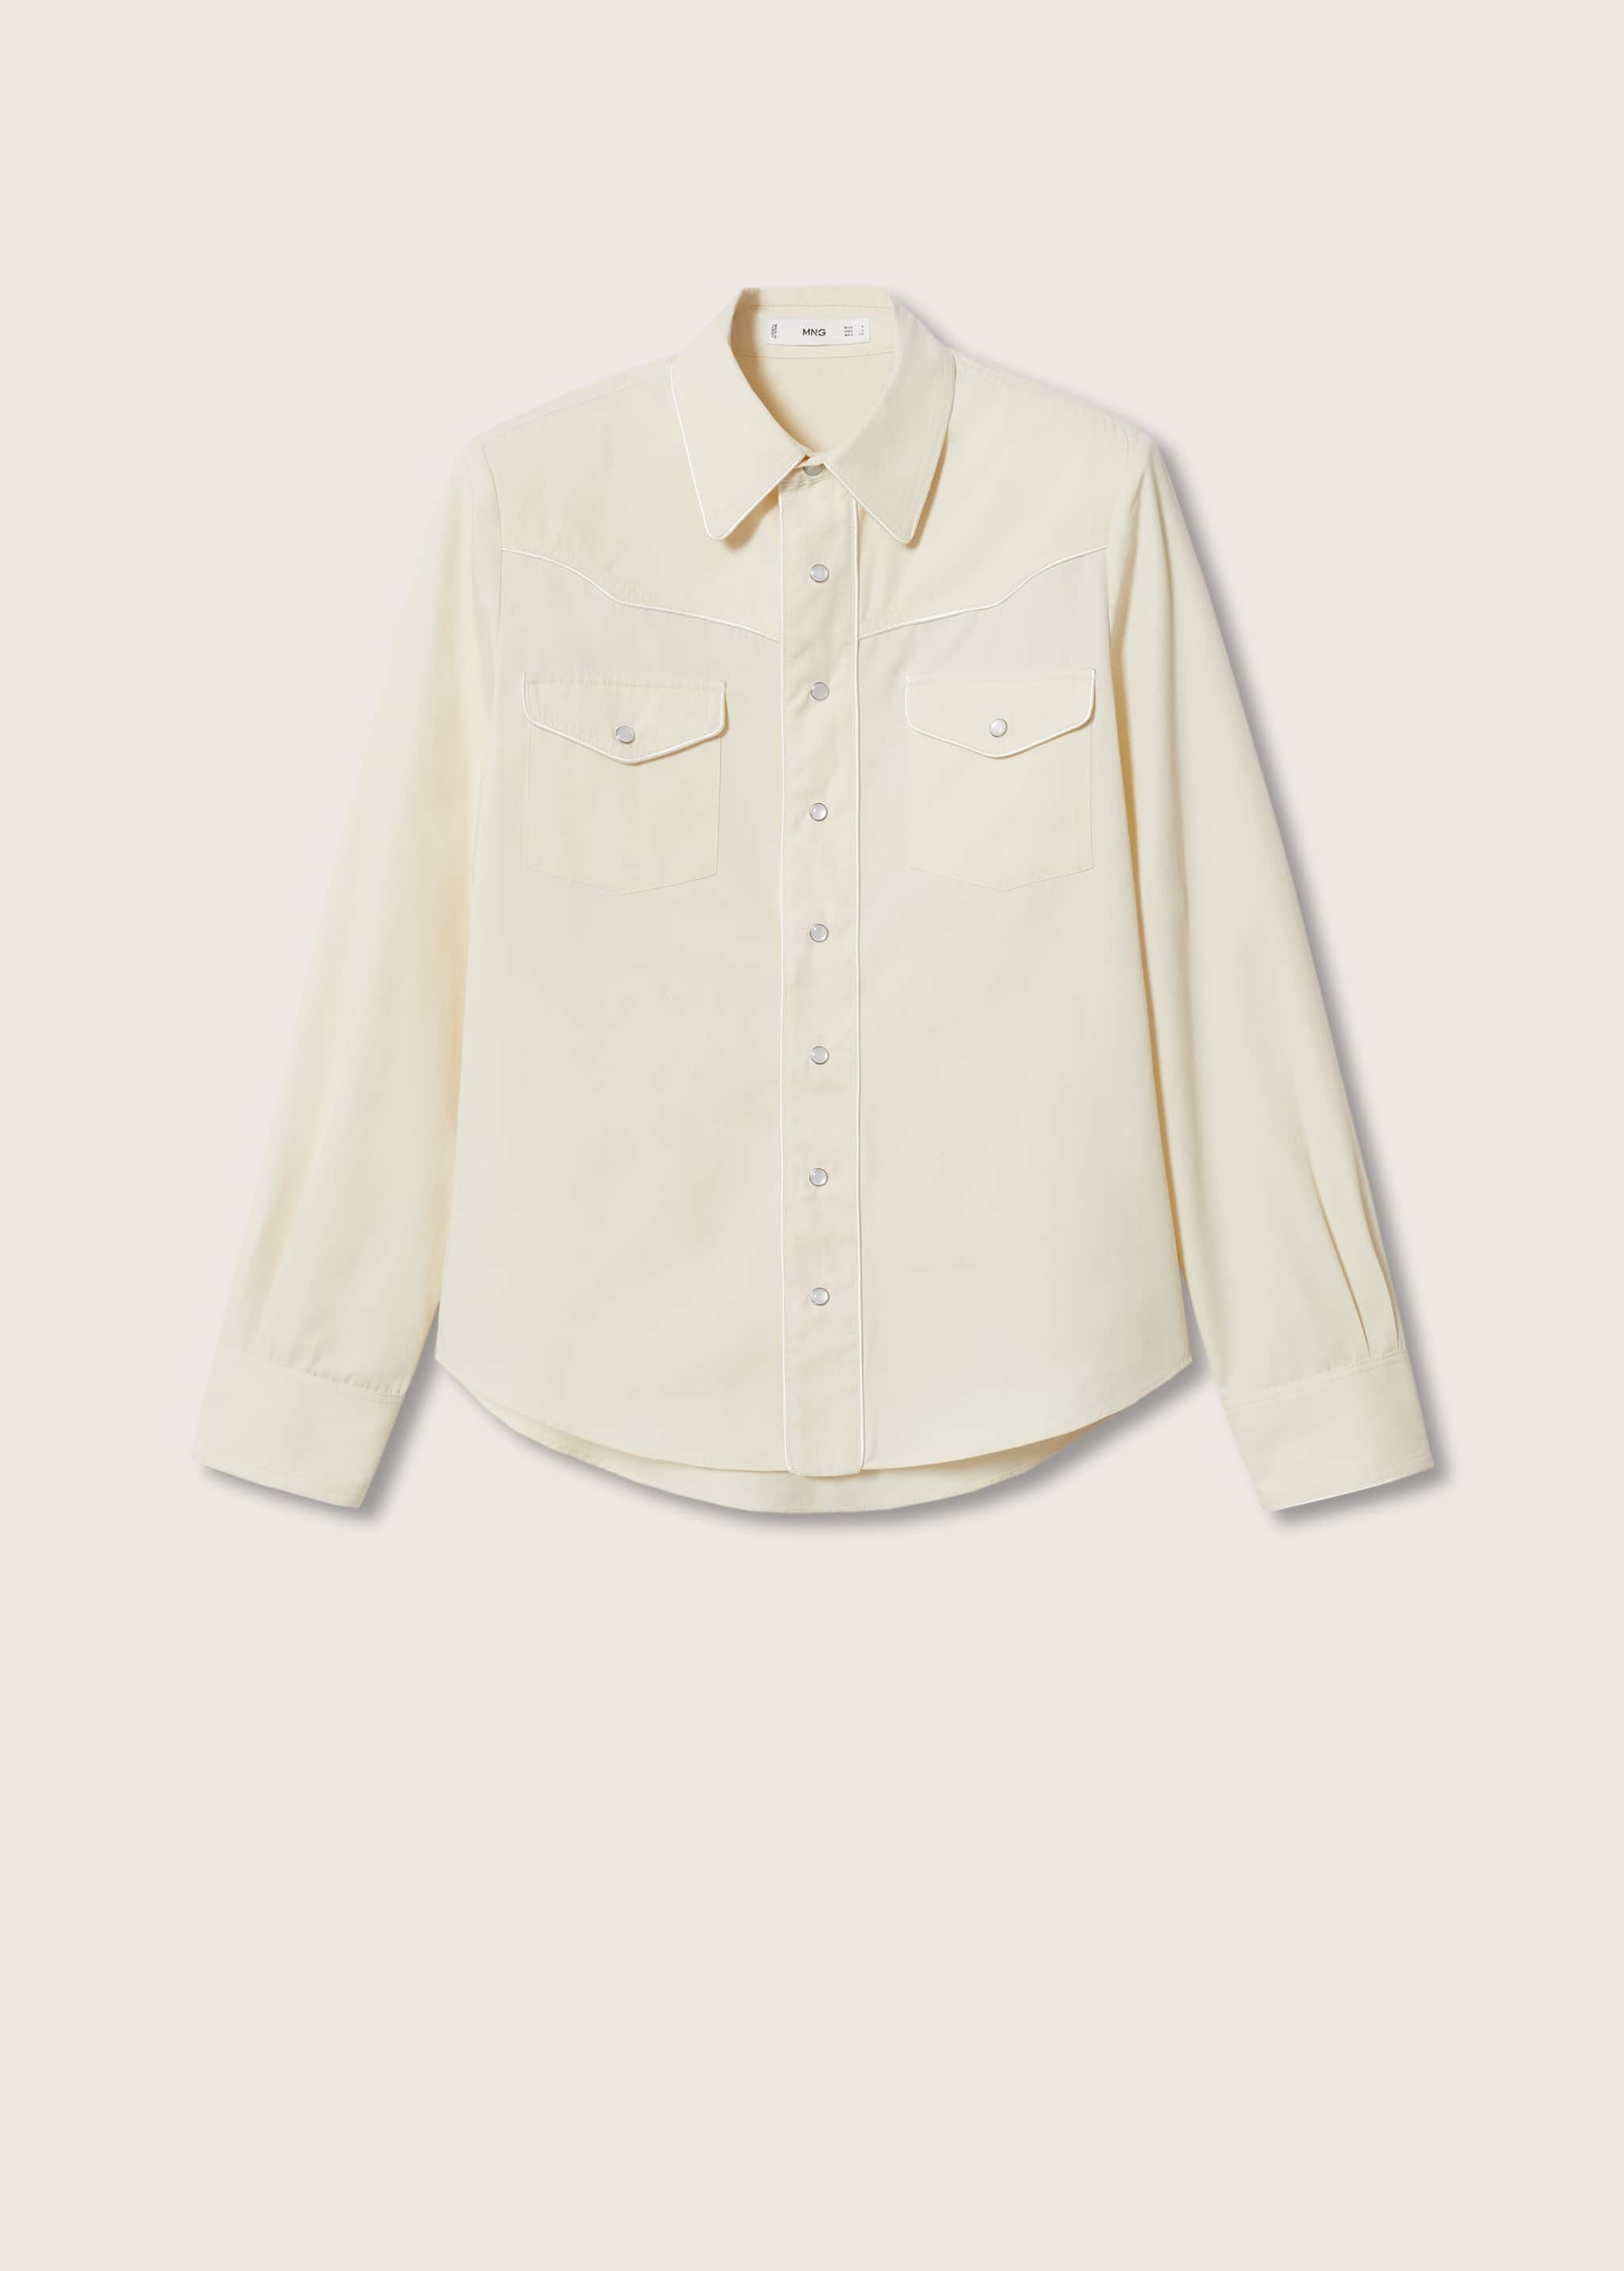 Cotton shirt with shoulder pads  - Article without model